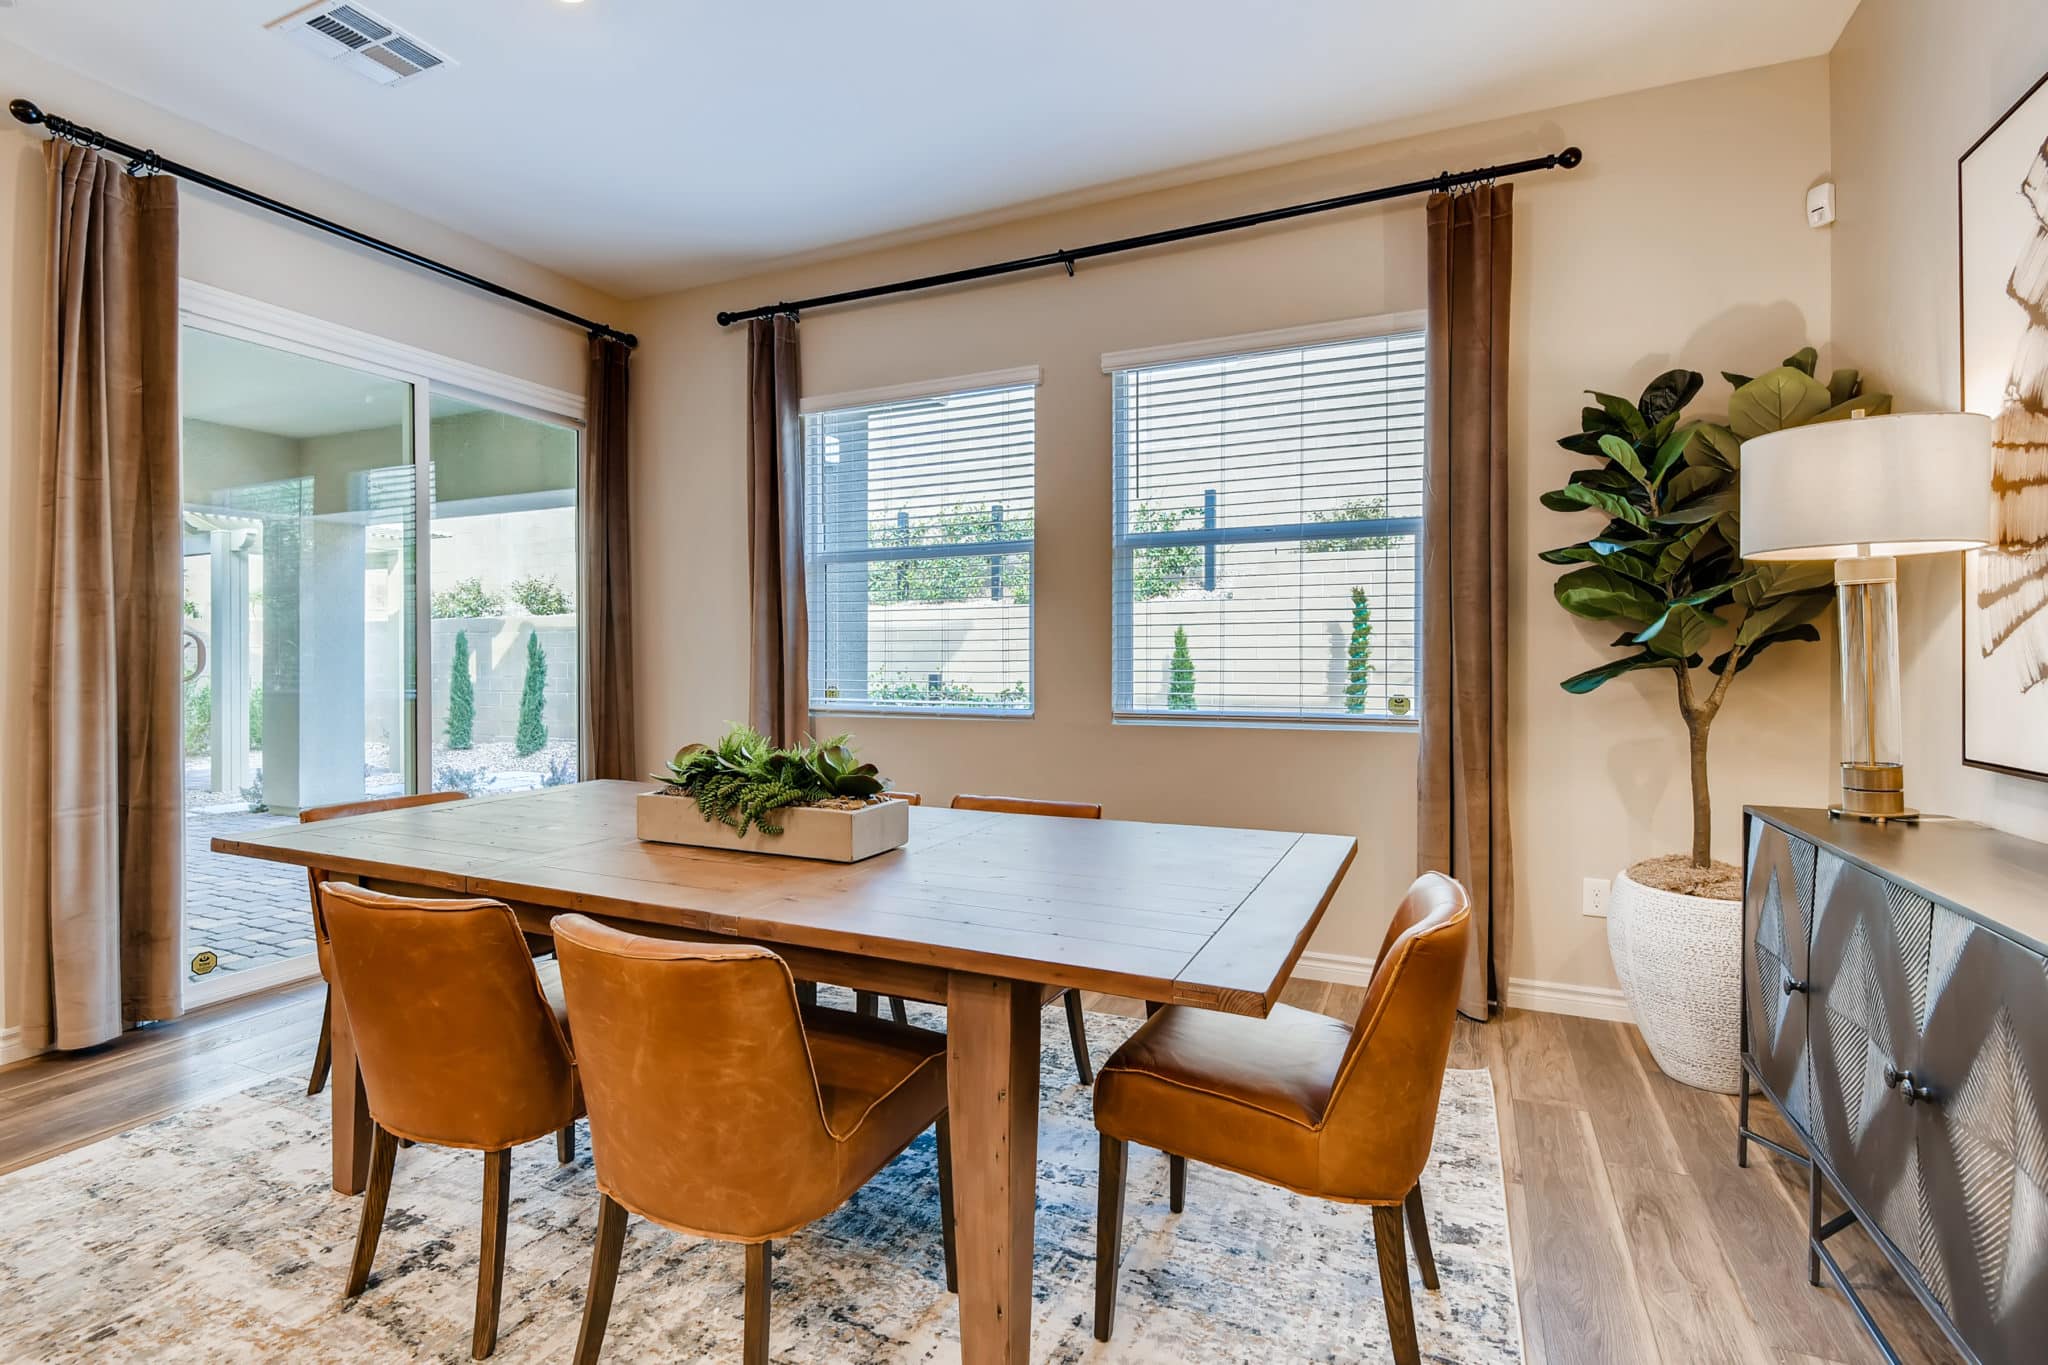 Dining Room of Everly model at Heritage by Lennar